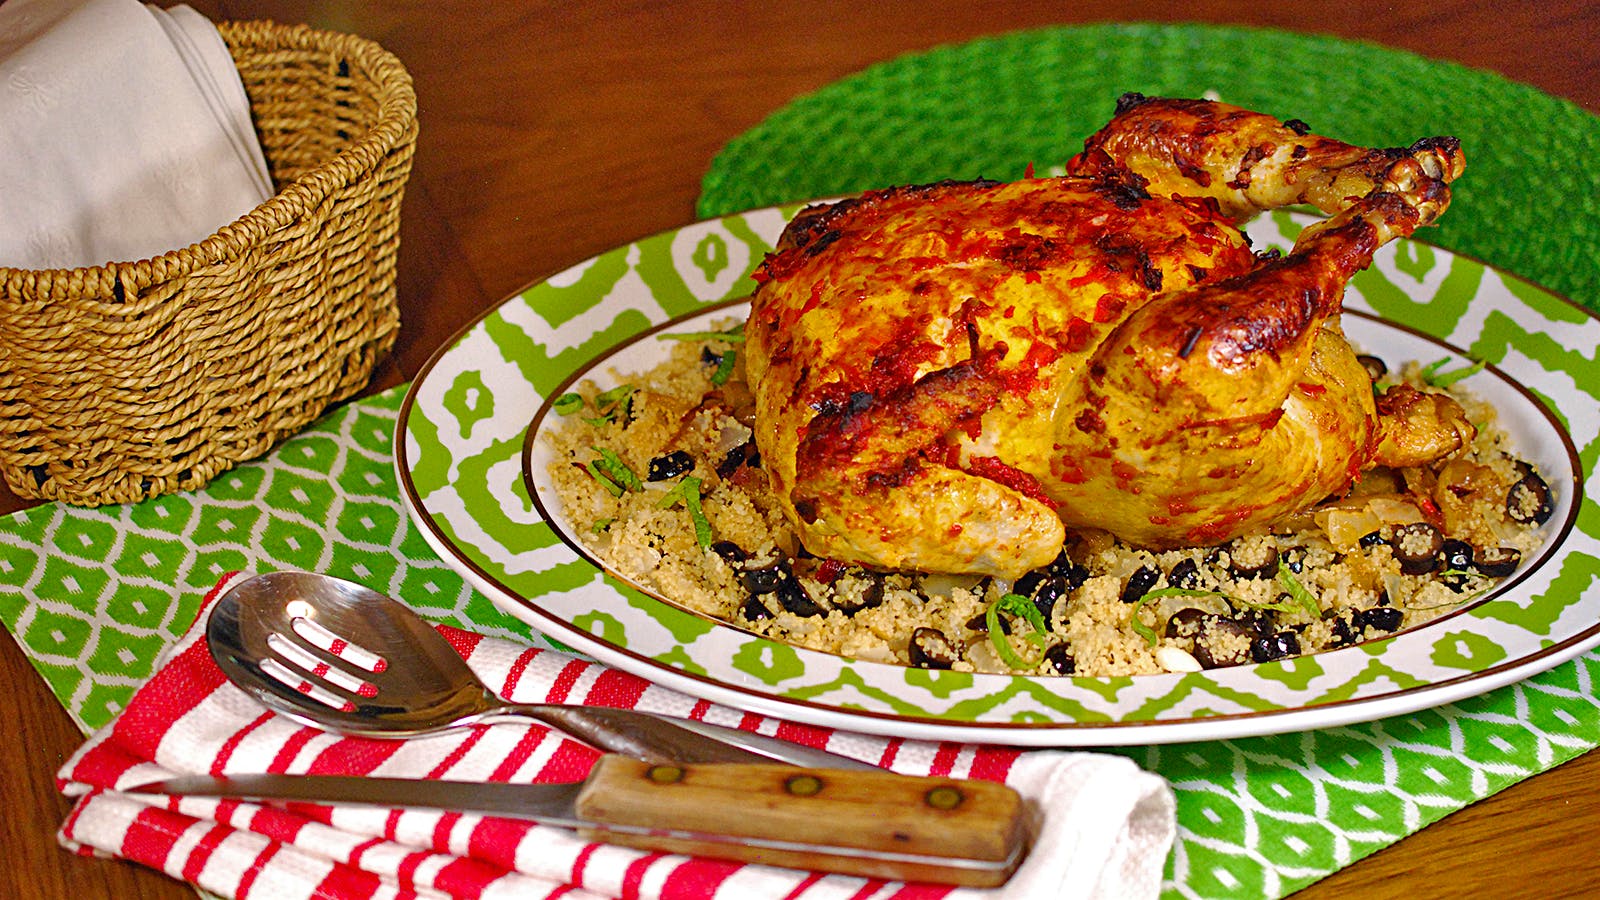 8 & $20: Harissa Chicken with Savory Couscous